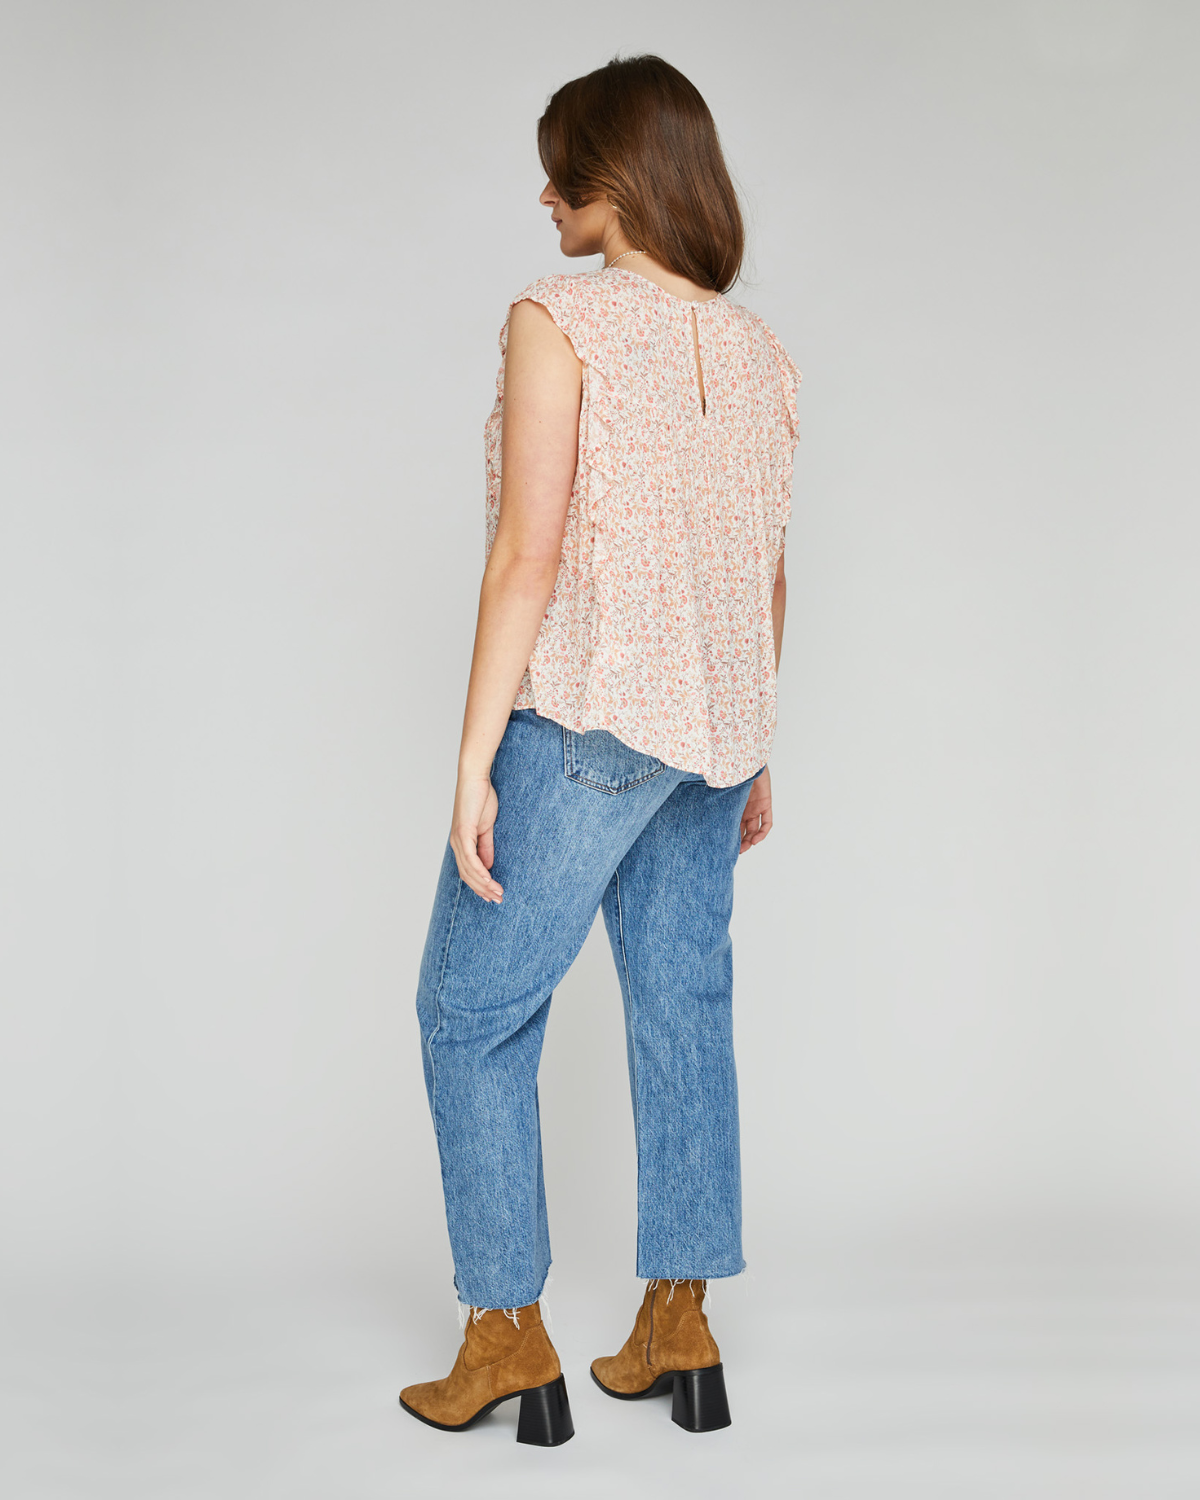 Leona Top - Apricot Ditsy | Gentle Fawn